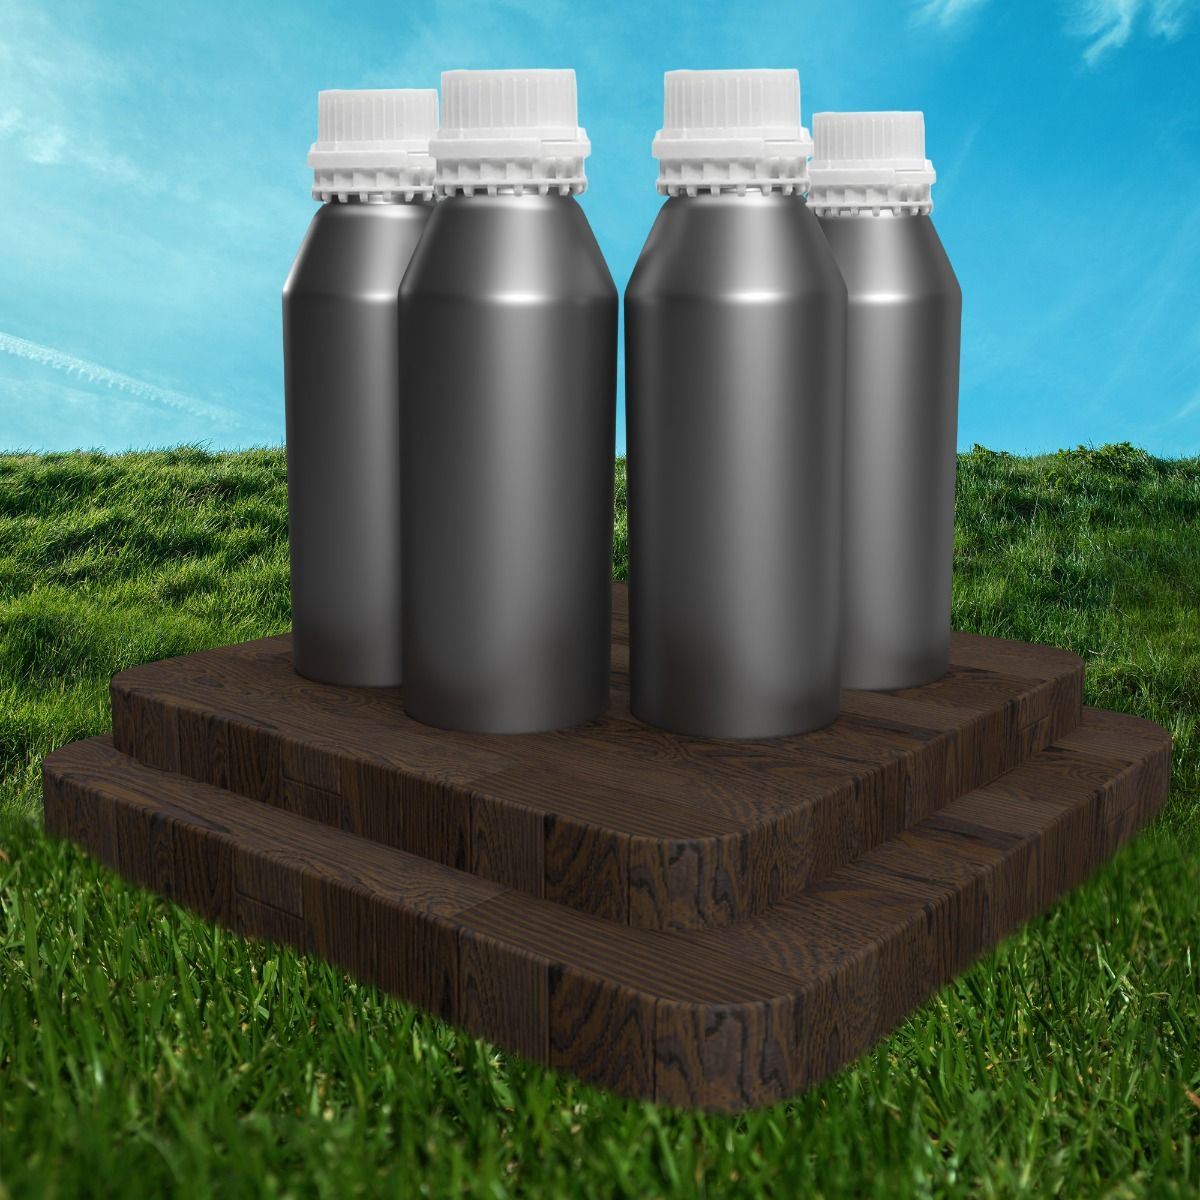 https://marytylor.com/media/catalog/product/cache/320e6c74605d60164149ca753f04e32c/image/2836604/brushed-aluminum-bottles-16-oz-4pk-wholesale-great-for-essential-oils-with-caps-and-plugs-premium-lightweight-resealable-distributed-by-mary-tylor-naturals.jpg